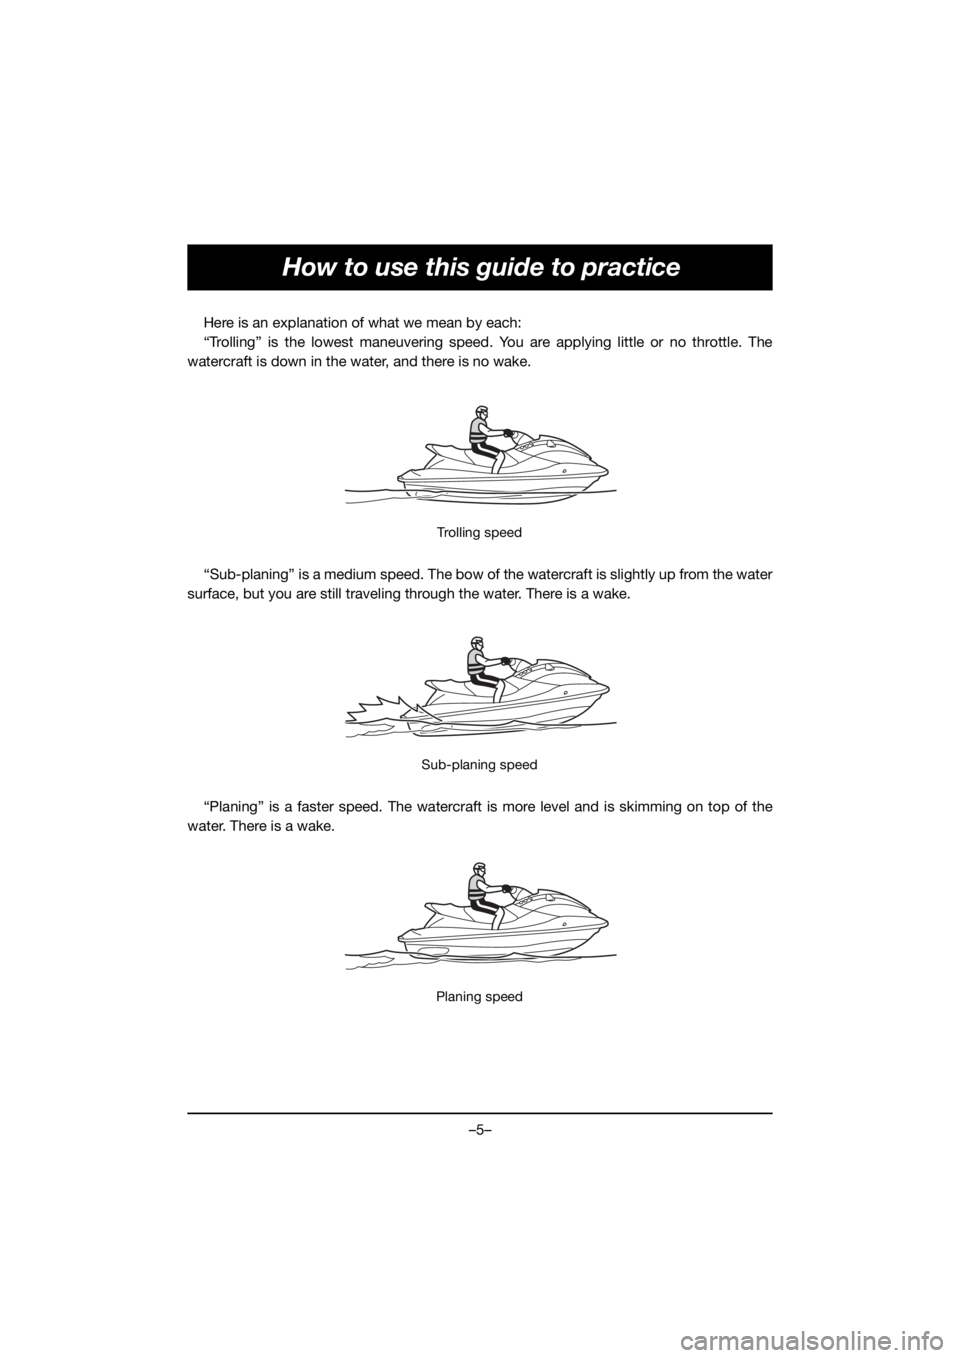 YAMAHA GP1800R SVHO 2021  Bruksanvisningar (in Swedish) –5–
How to use this guide to practice
Here is an explanation of what we mean by each:
“Trolling” is the lowest maneuvering speed. You are applying little or no throttle. The
watercraft is down